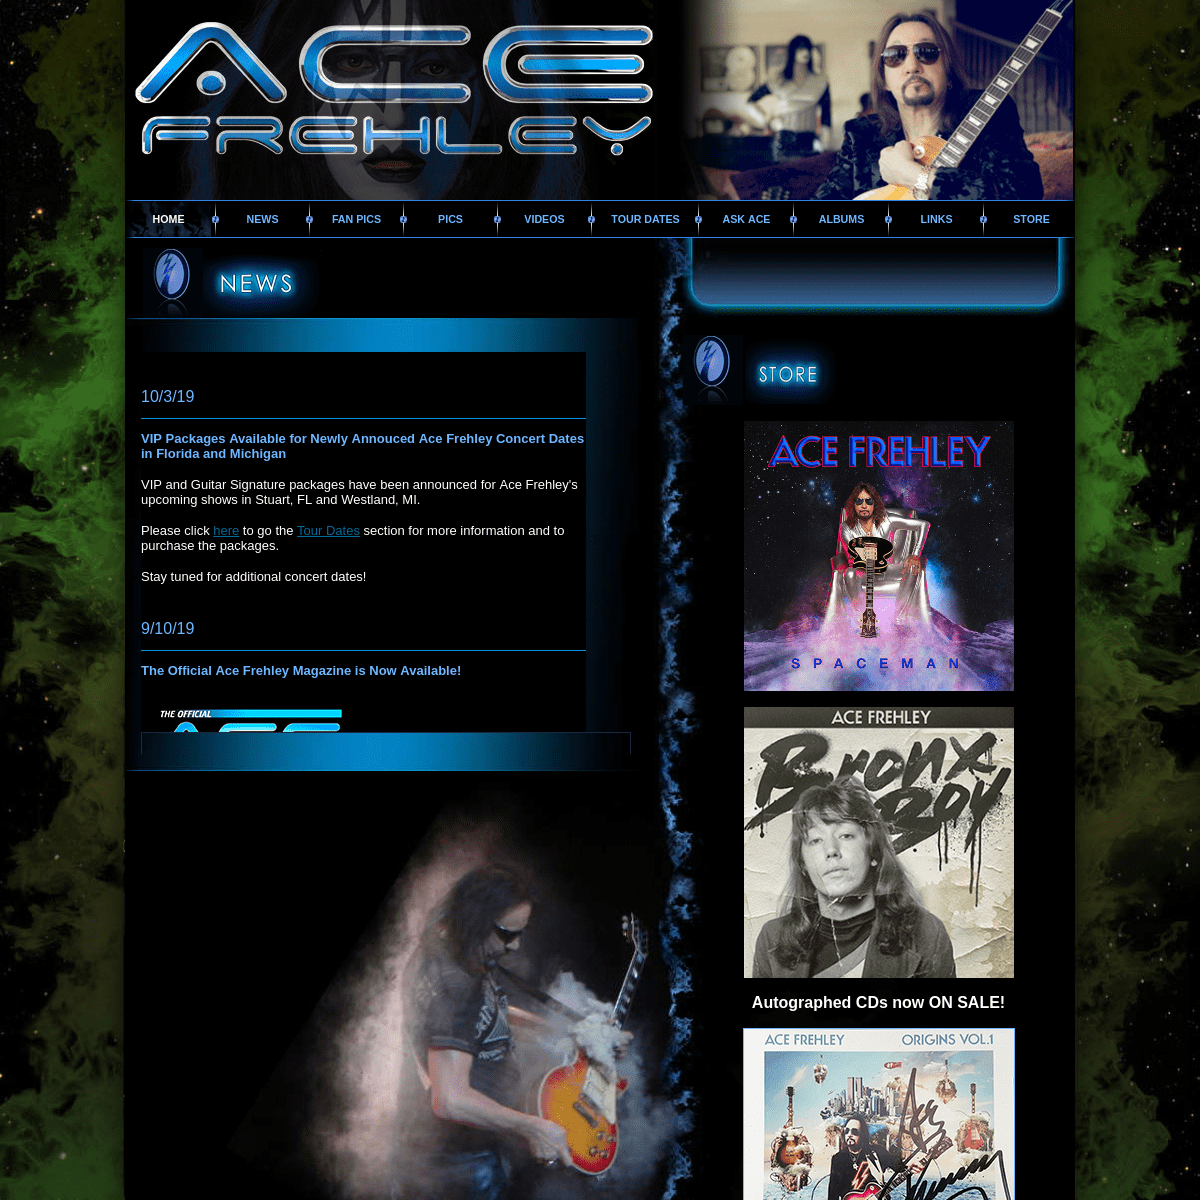 A complete backup of acefrehley.com